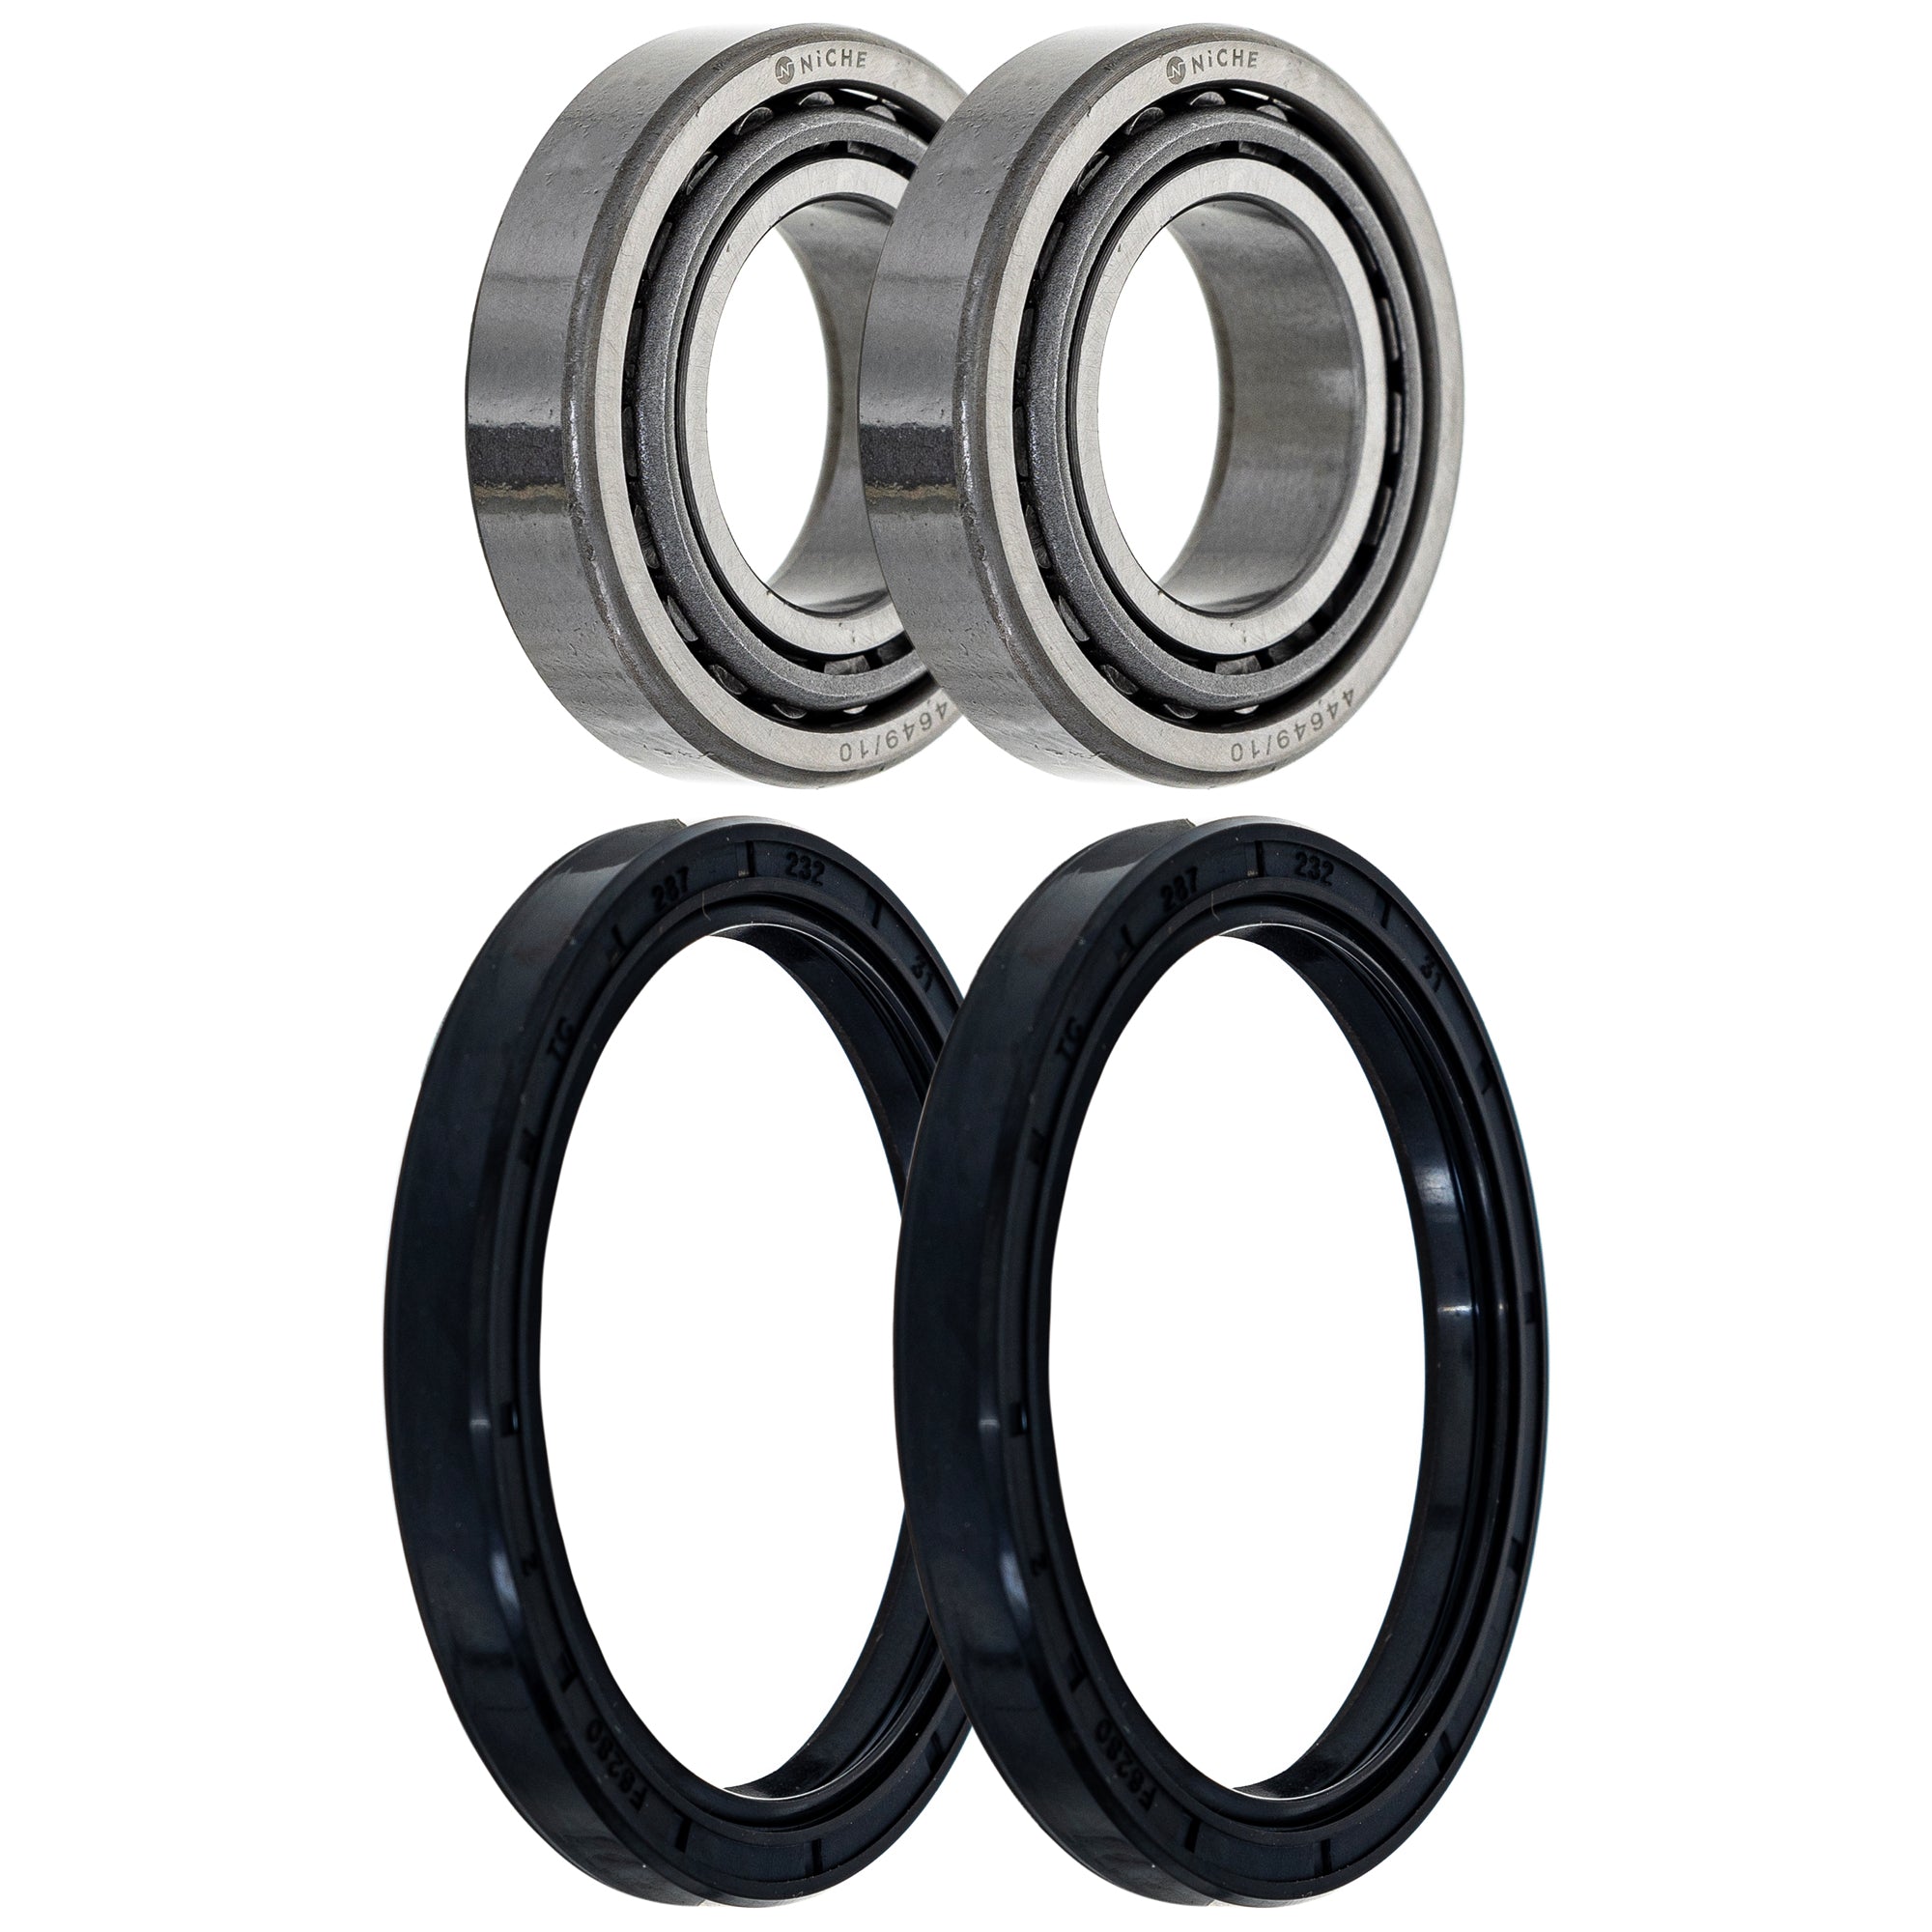 Wheel Bearing Seal Kit for zOTHER Xplorer Xpedition Worker Trail NICHE MK1009086